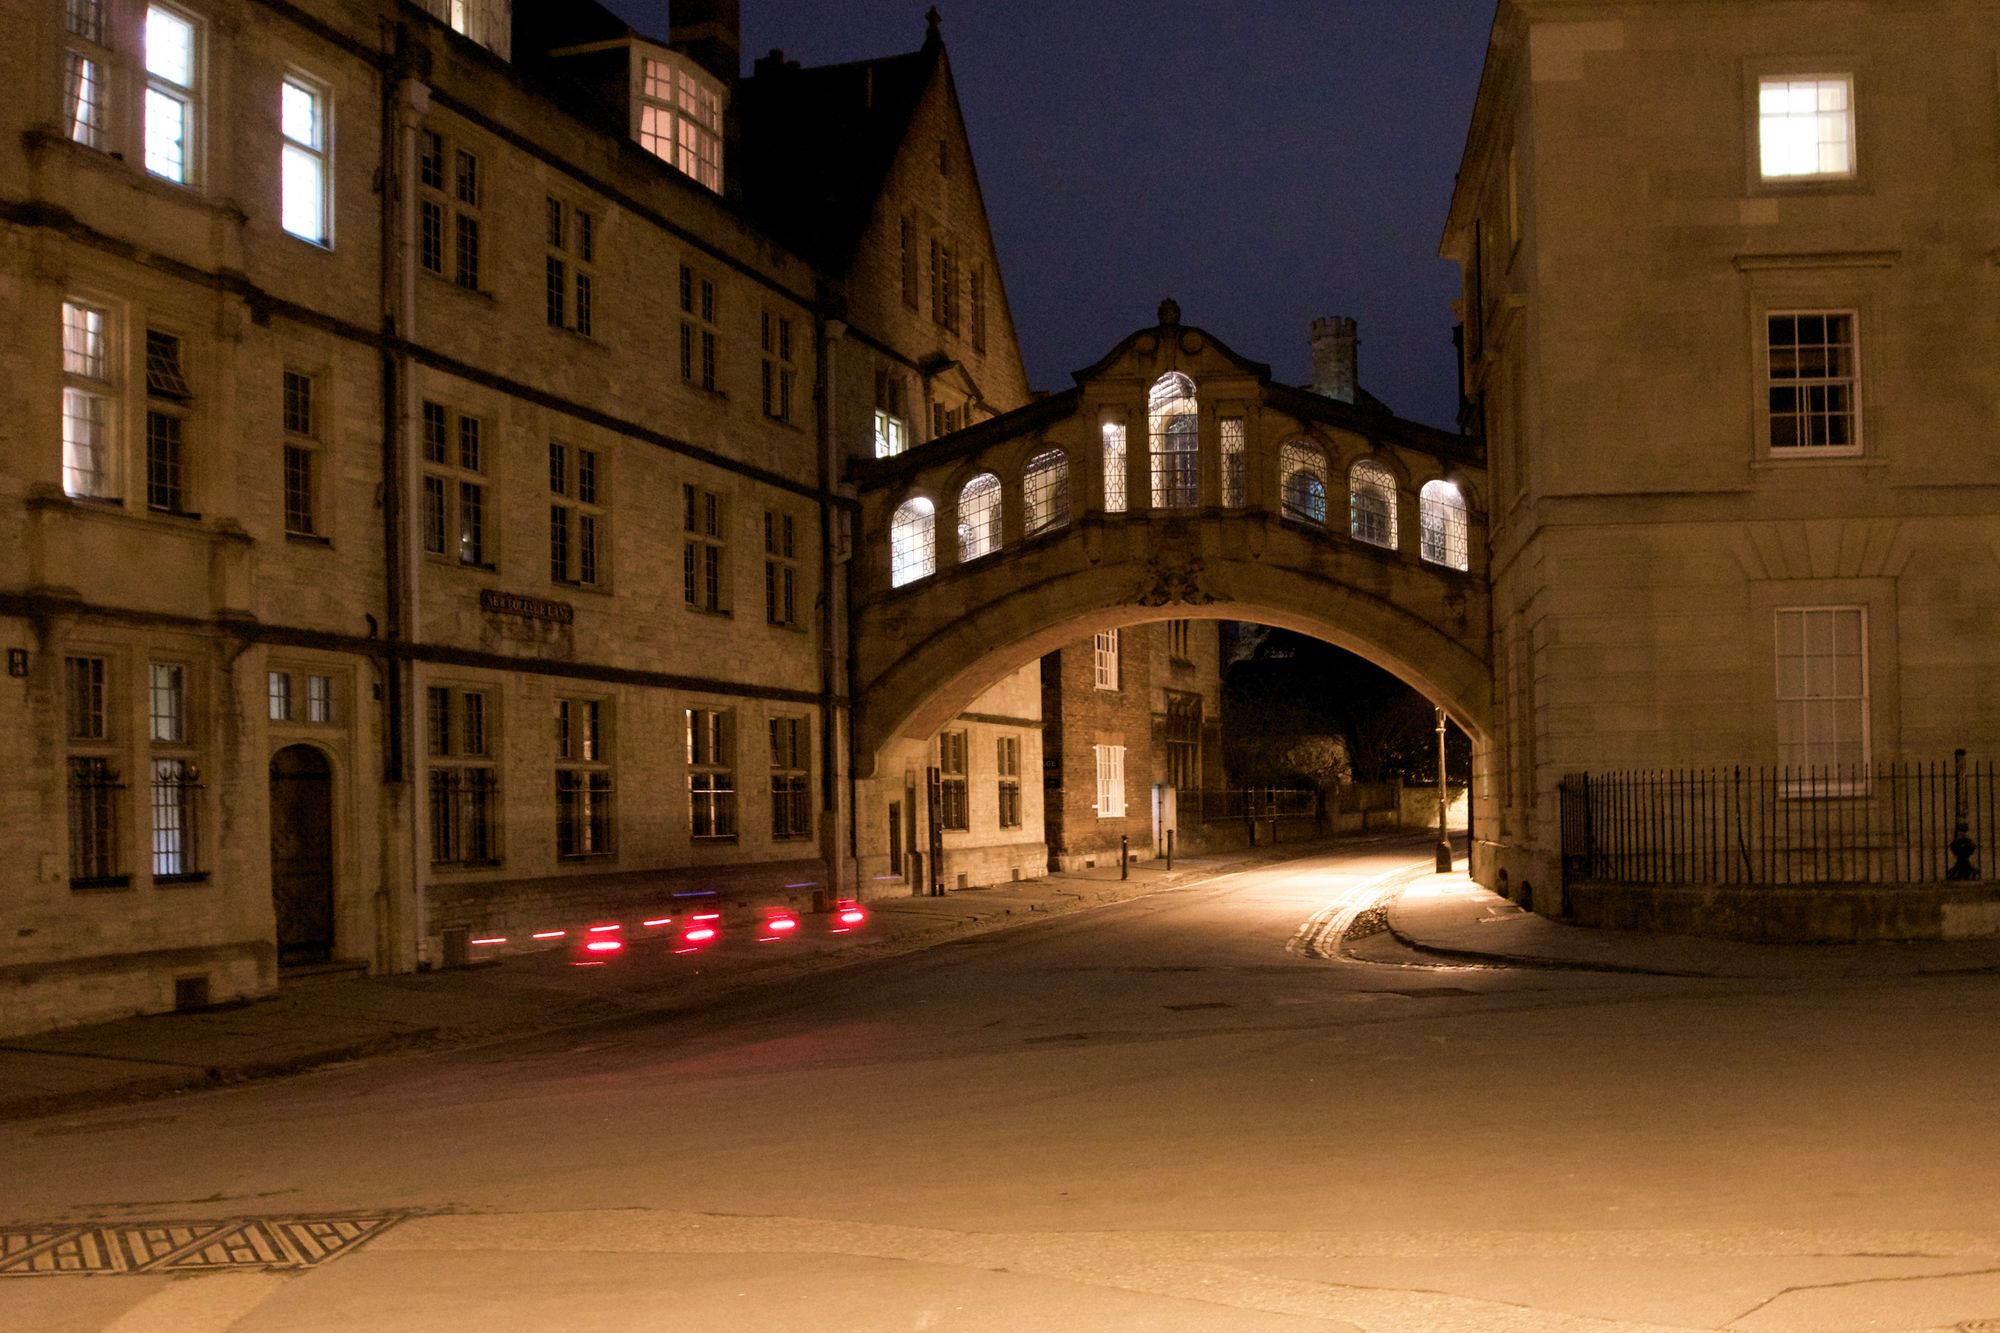 An arched bridge between two buildings over a street at night. The street is deserted save for some rear flashing cycle lights.